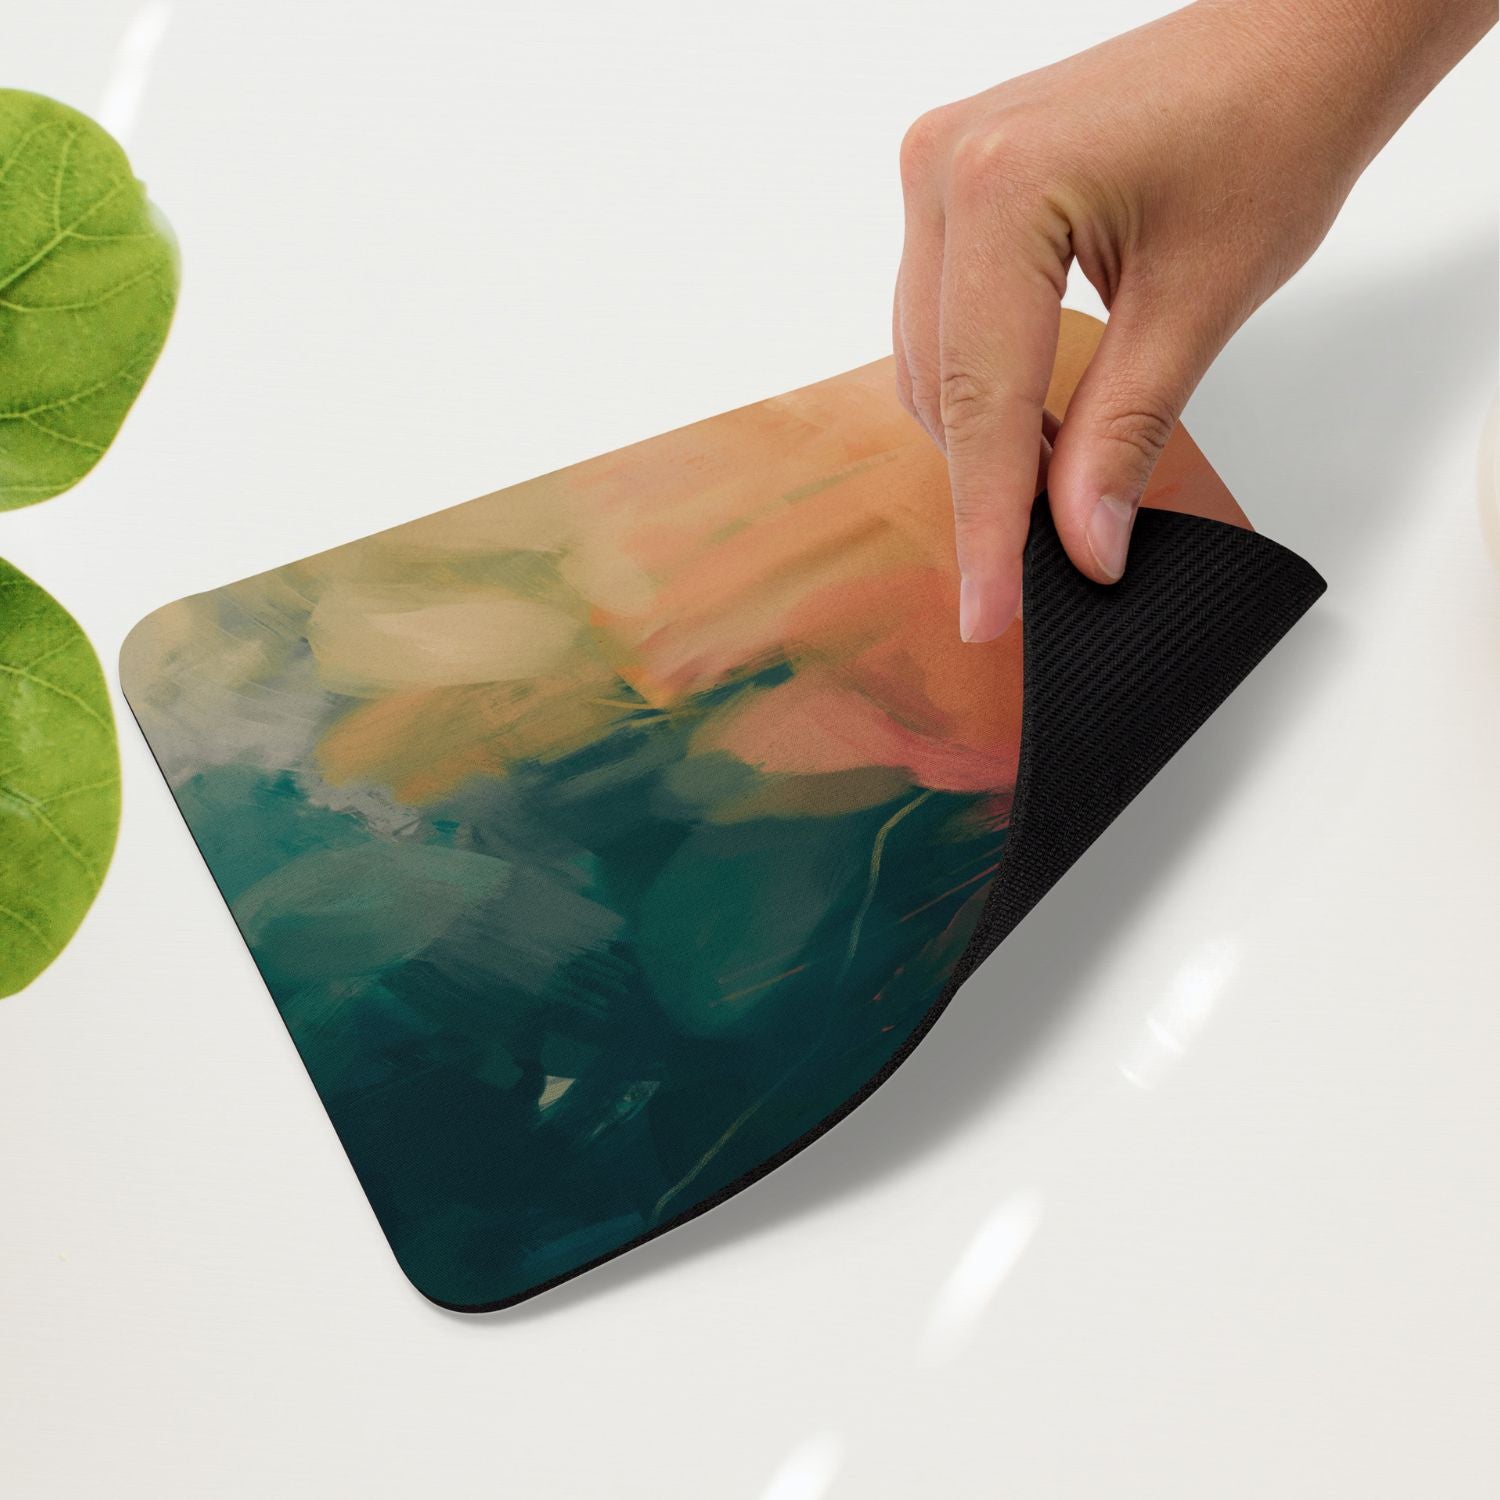 Eventide, colorful mouse pad for styling your office desk. Featuring artwork by Parima Studio. Home office styling accessories, cubicle styling accessories.